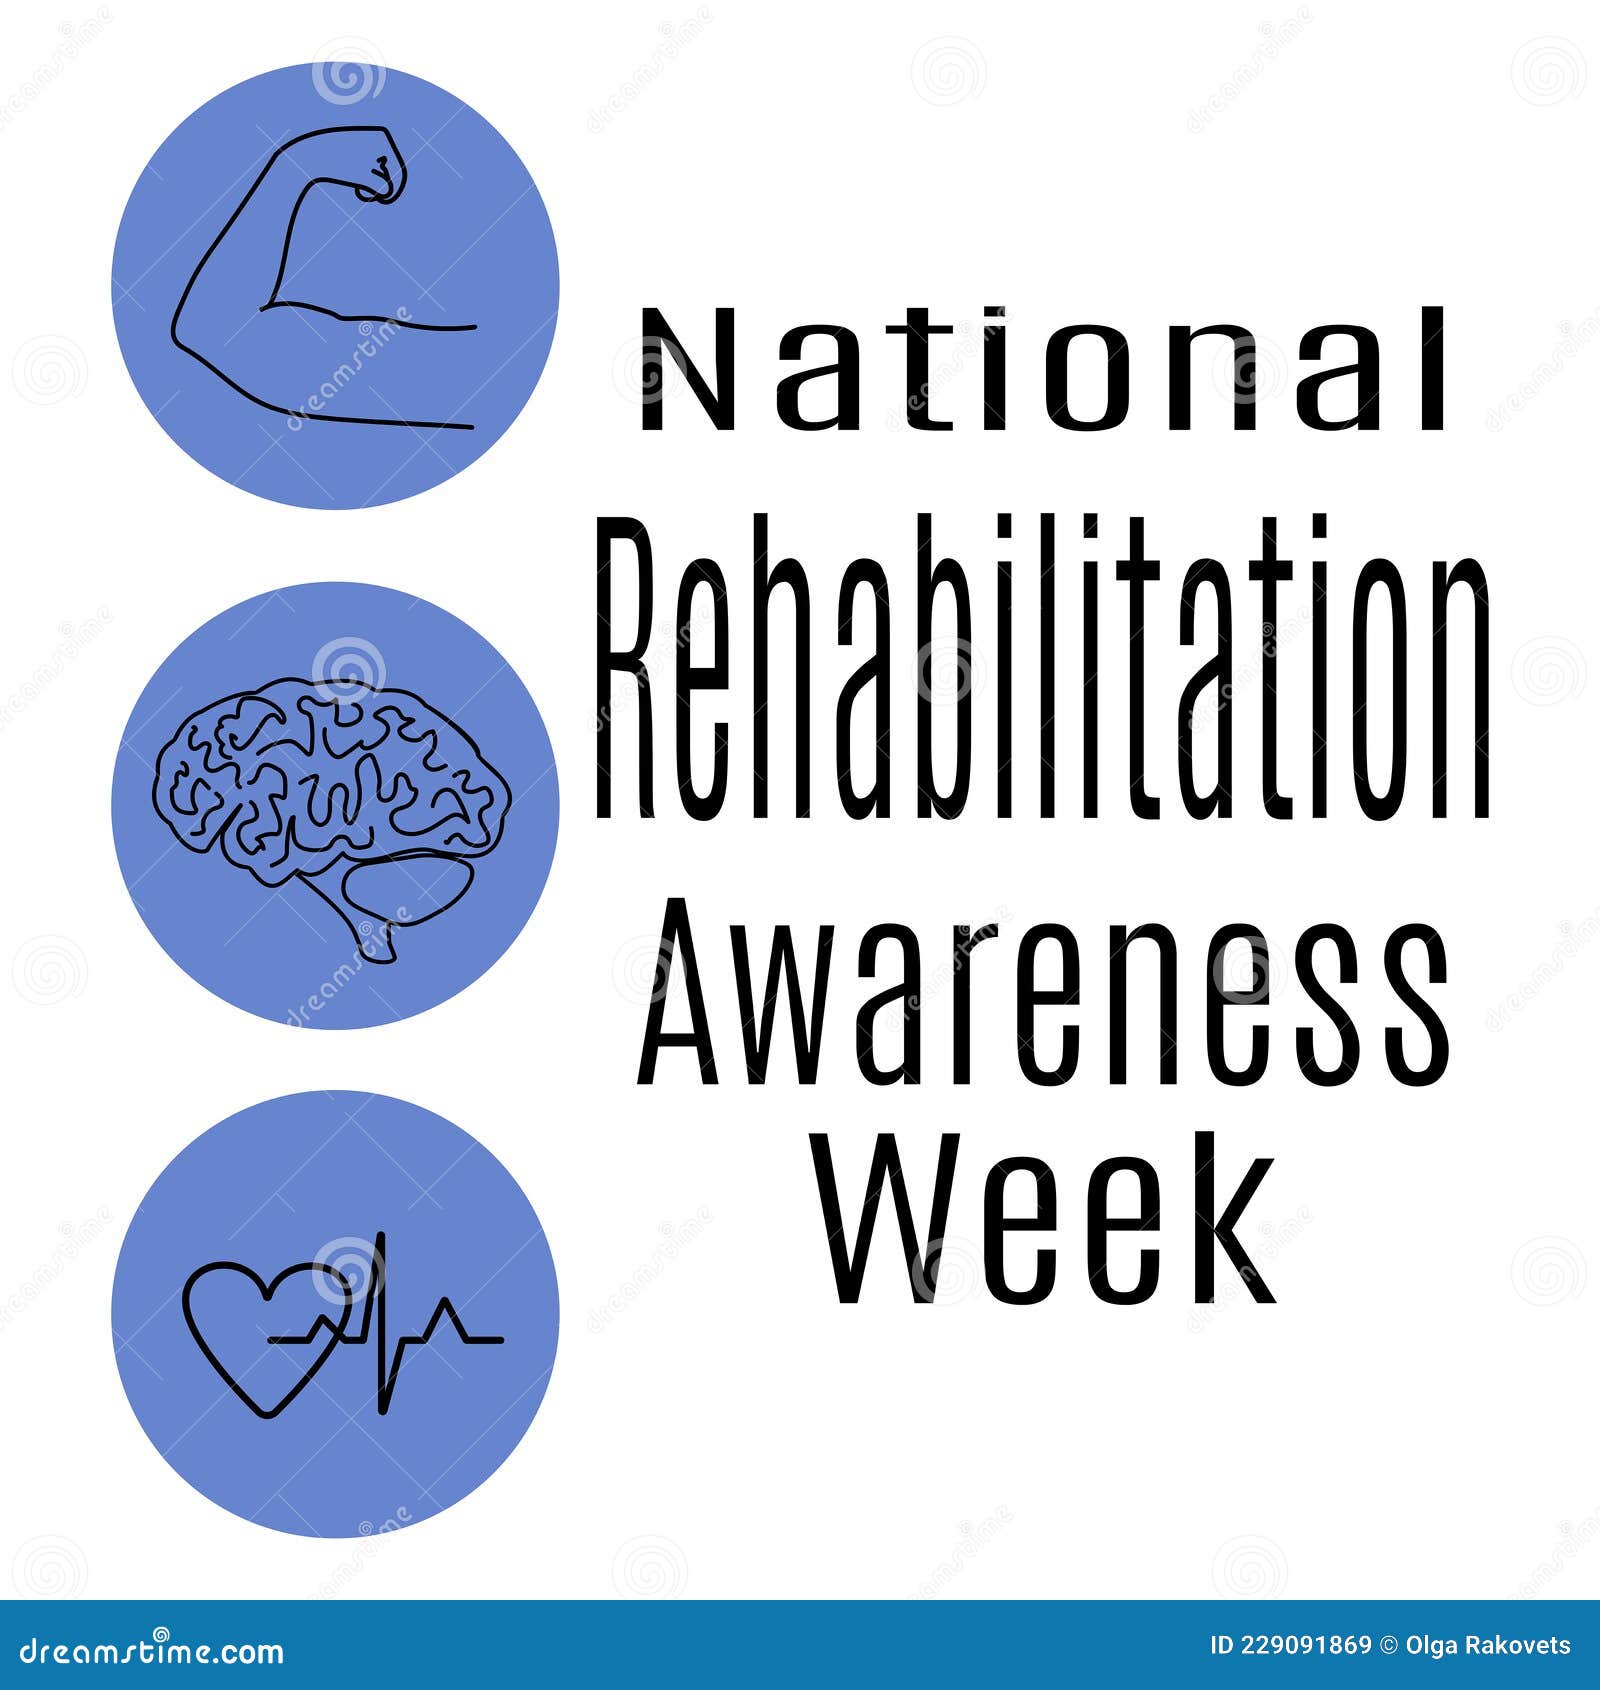 National Rehabilitation Awareness Week, Idea for a Post or Banner on